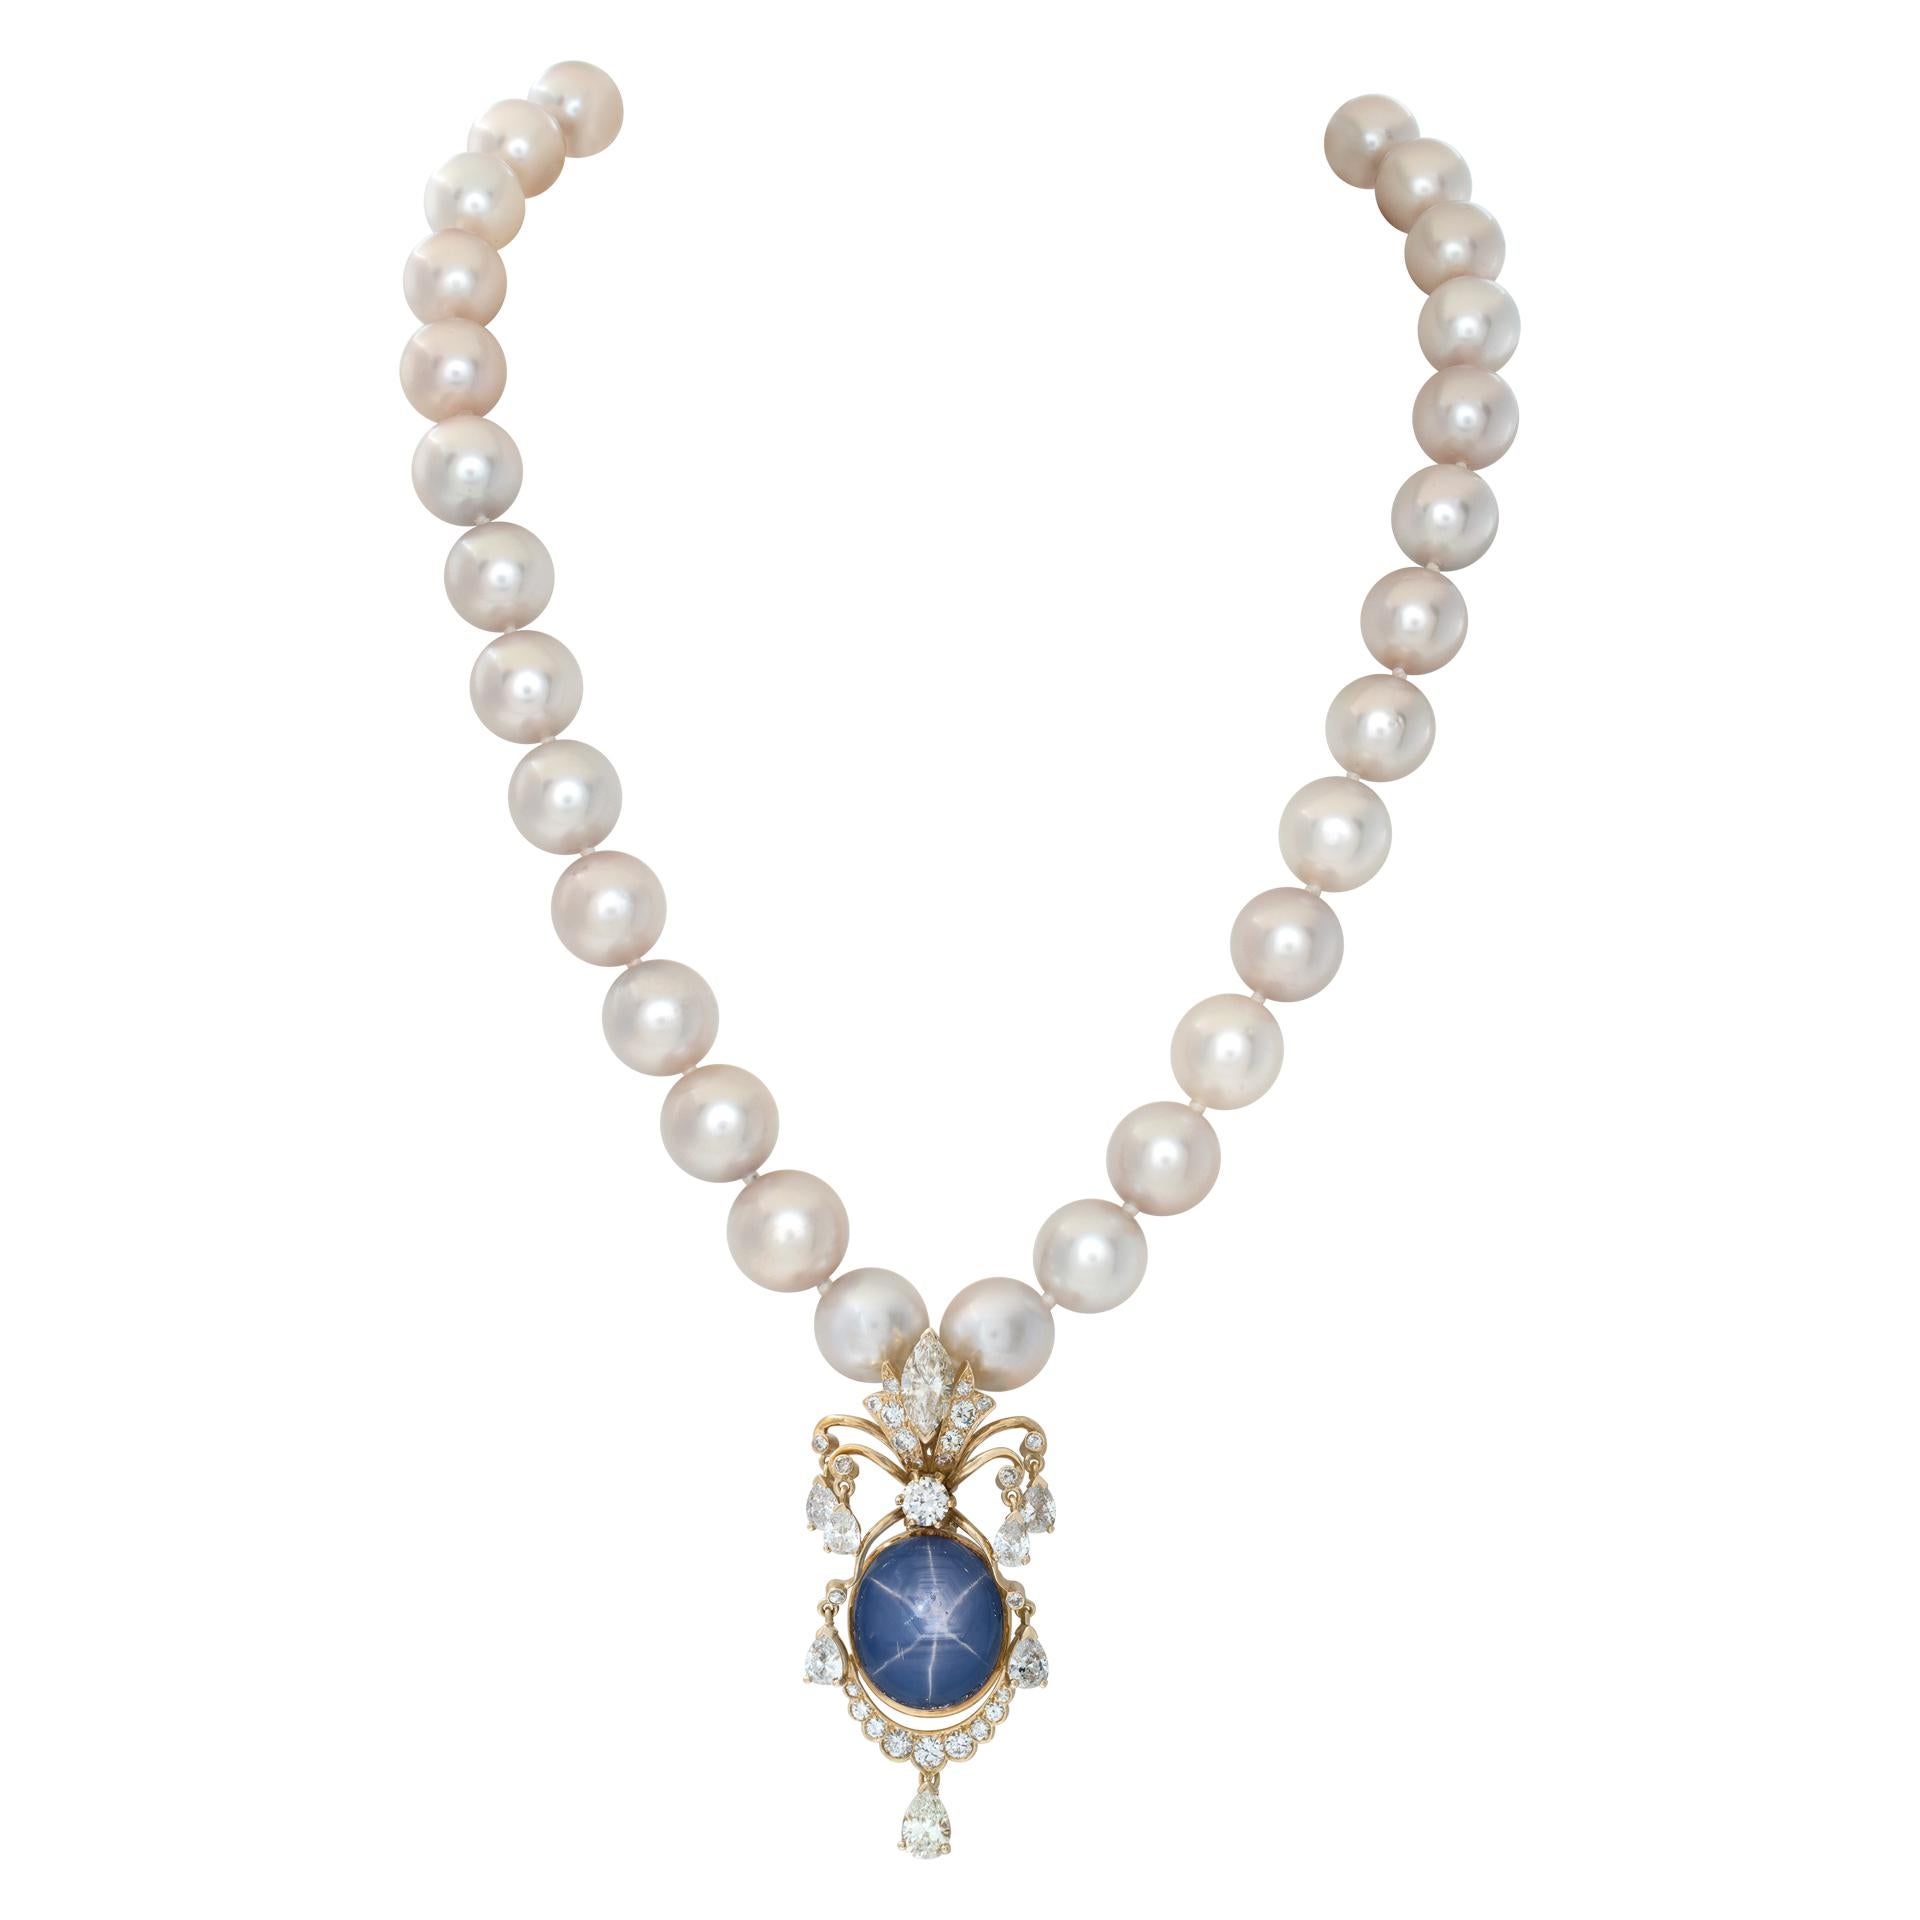 Women's Graduating South Sea Pearl Necklace with Cabochon Star Sapphire & Diamonds 